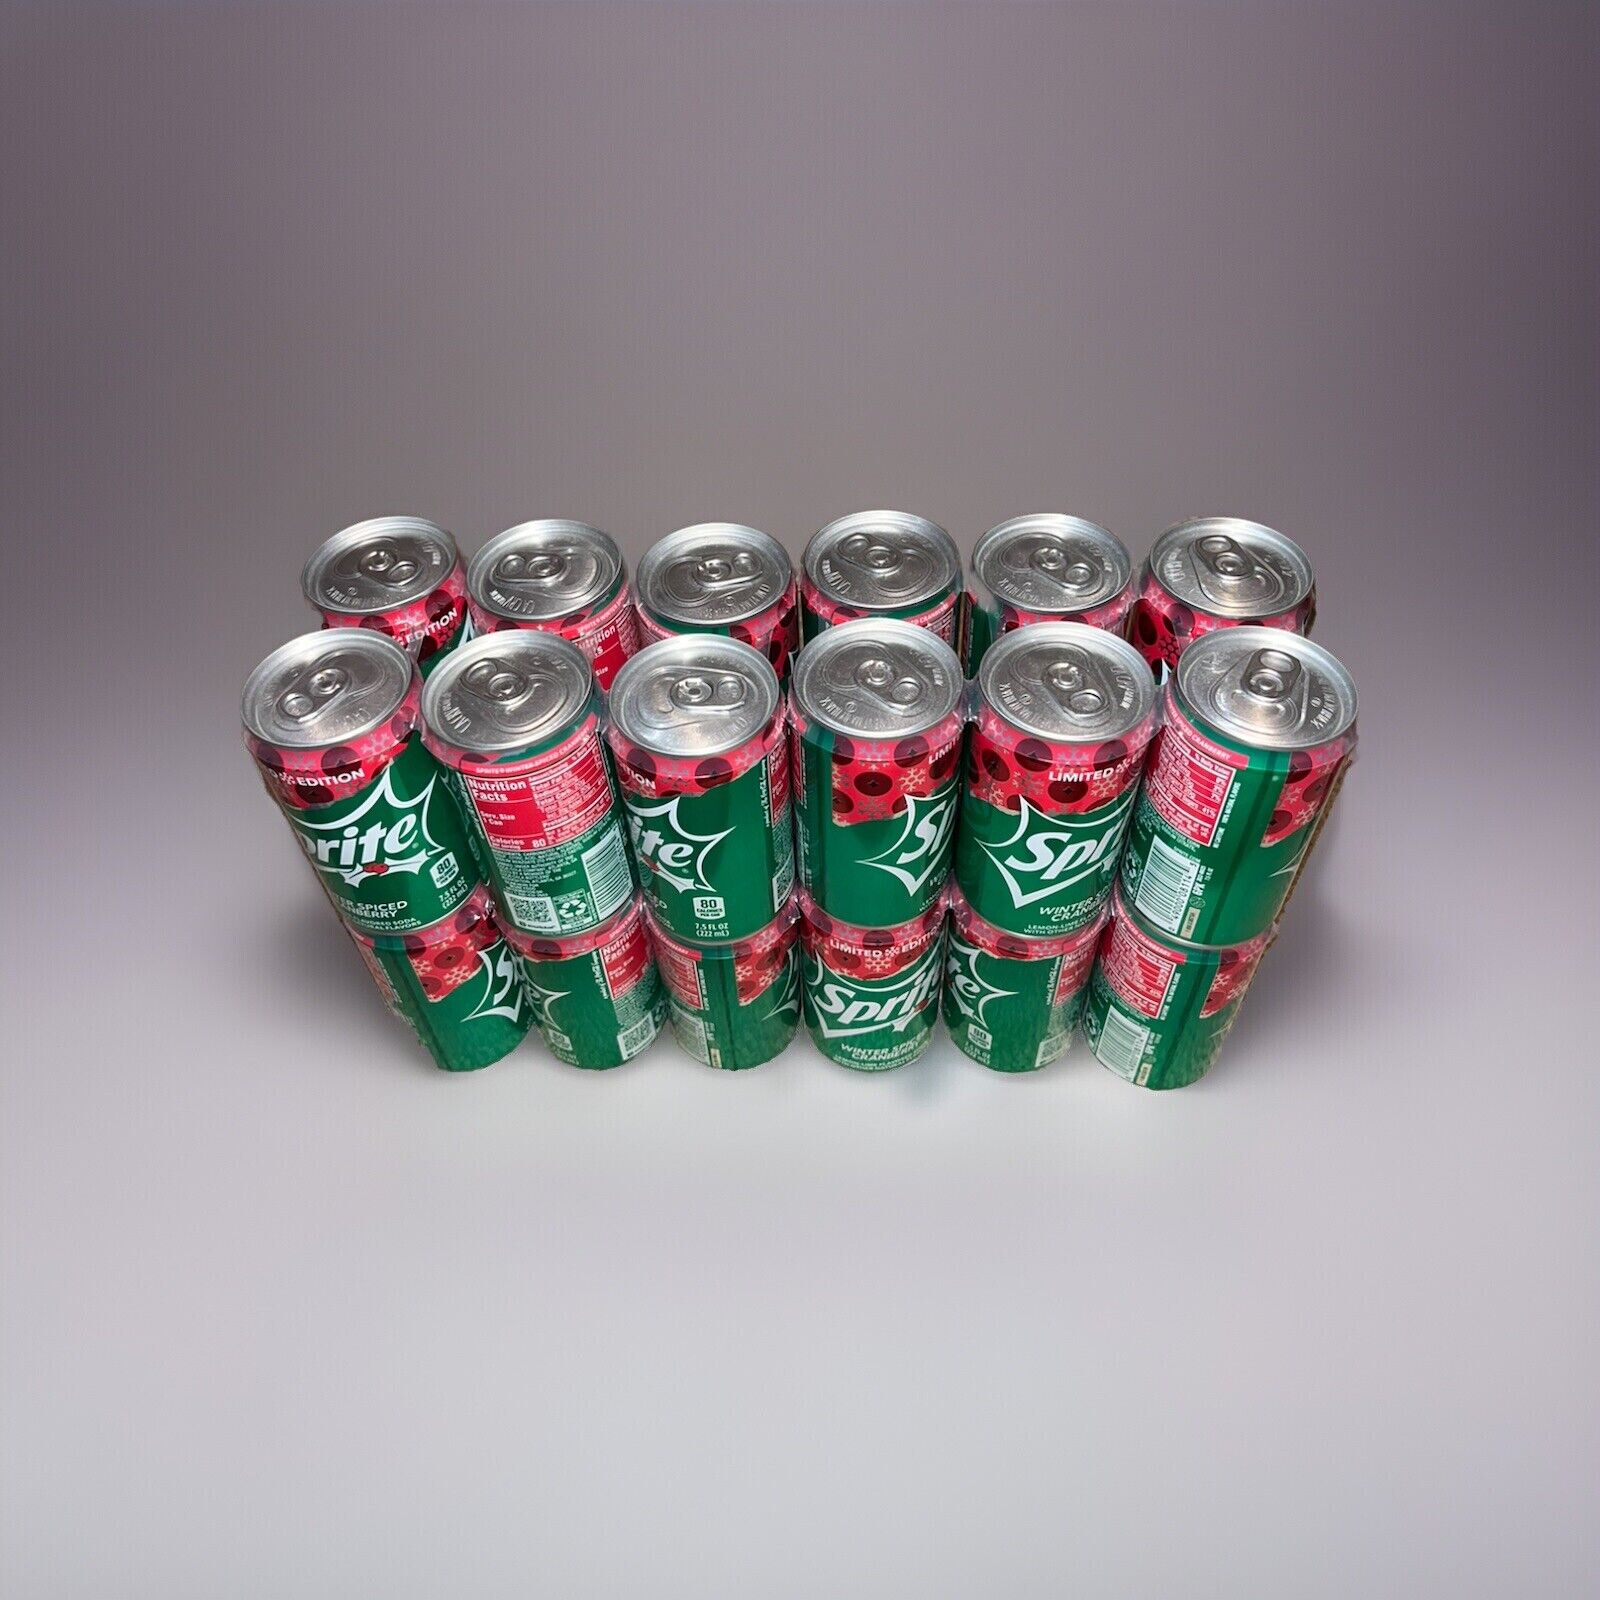 Sprite Winter Spiced Cranberry 2022 Limited Edition 24 Mini Cans Collectors Item